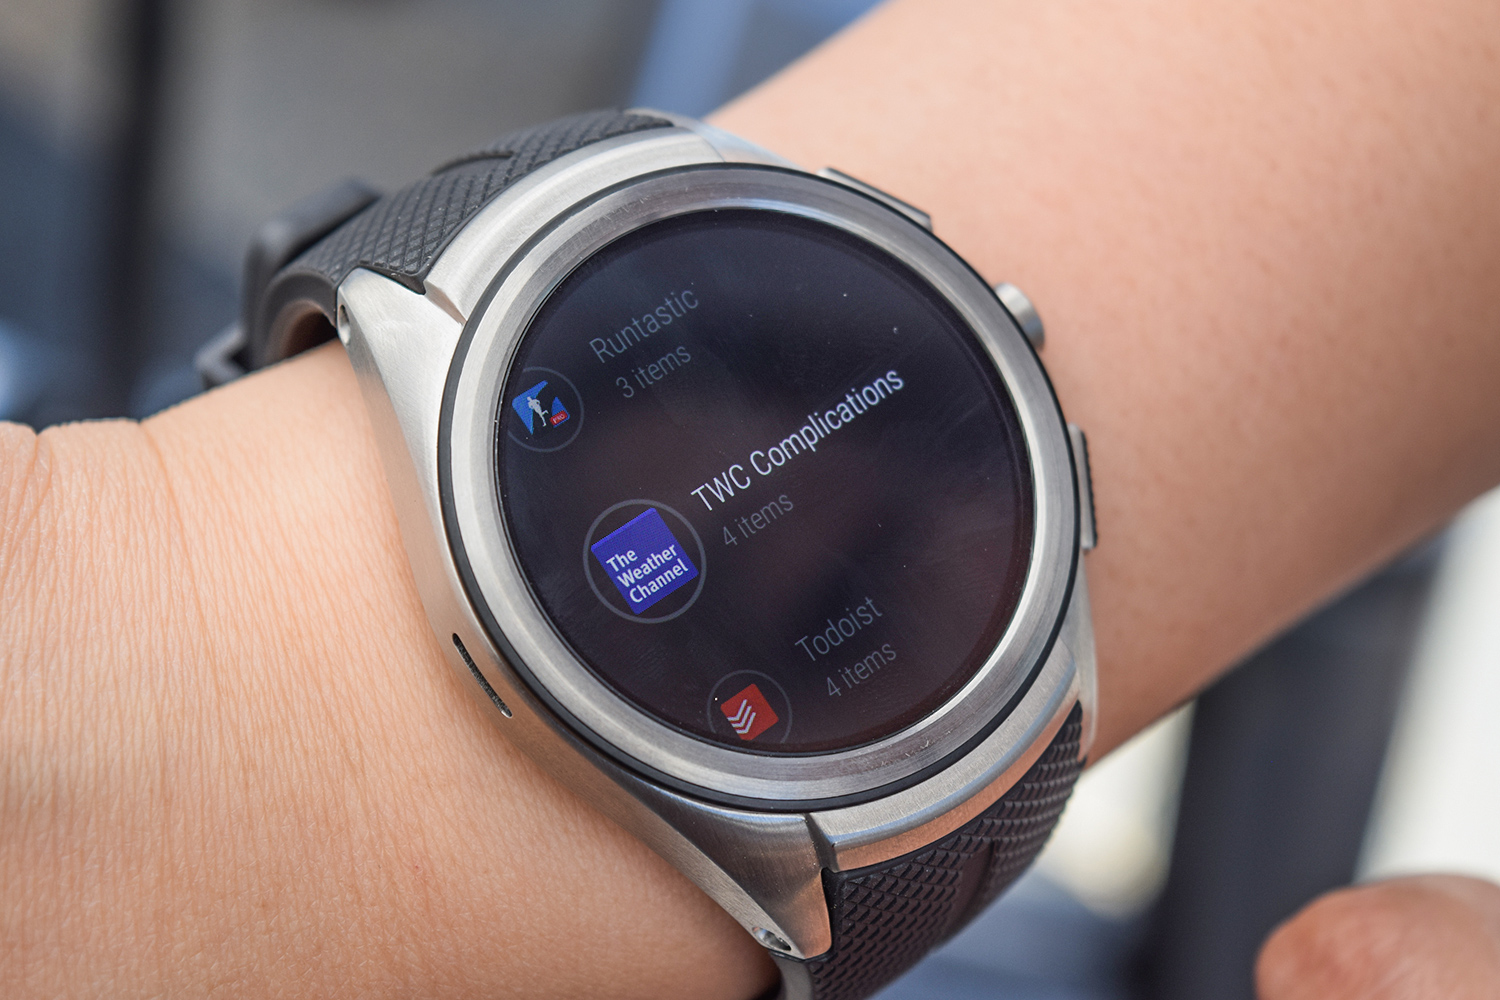 Android Wear 2